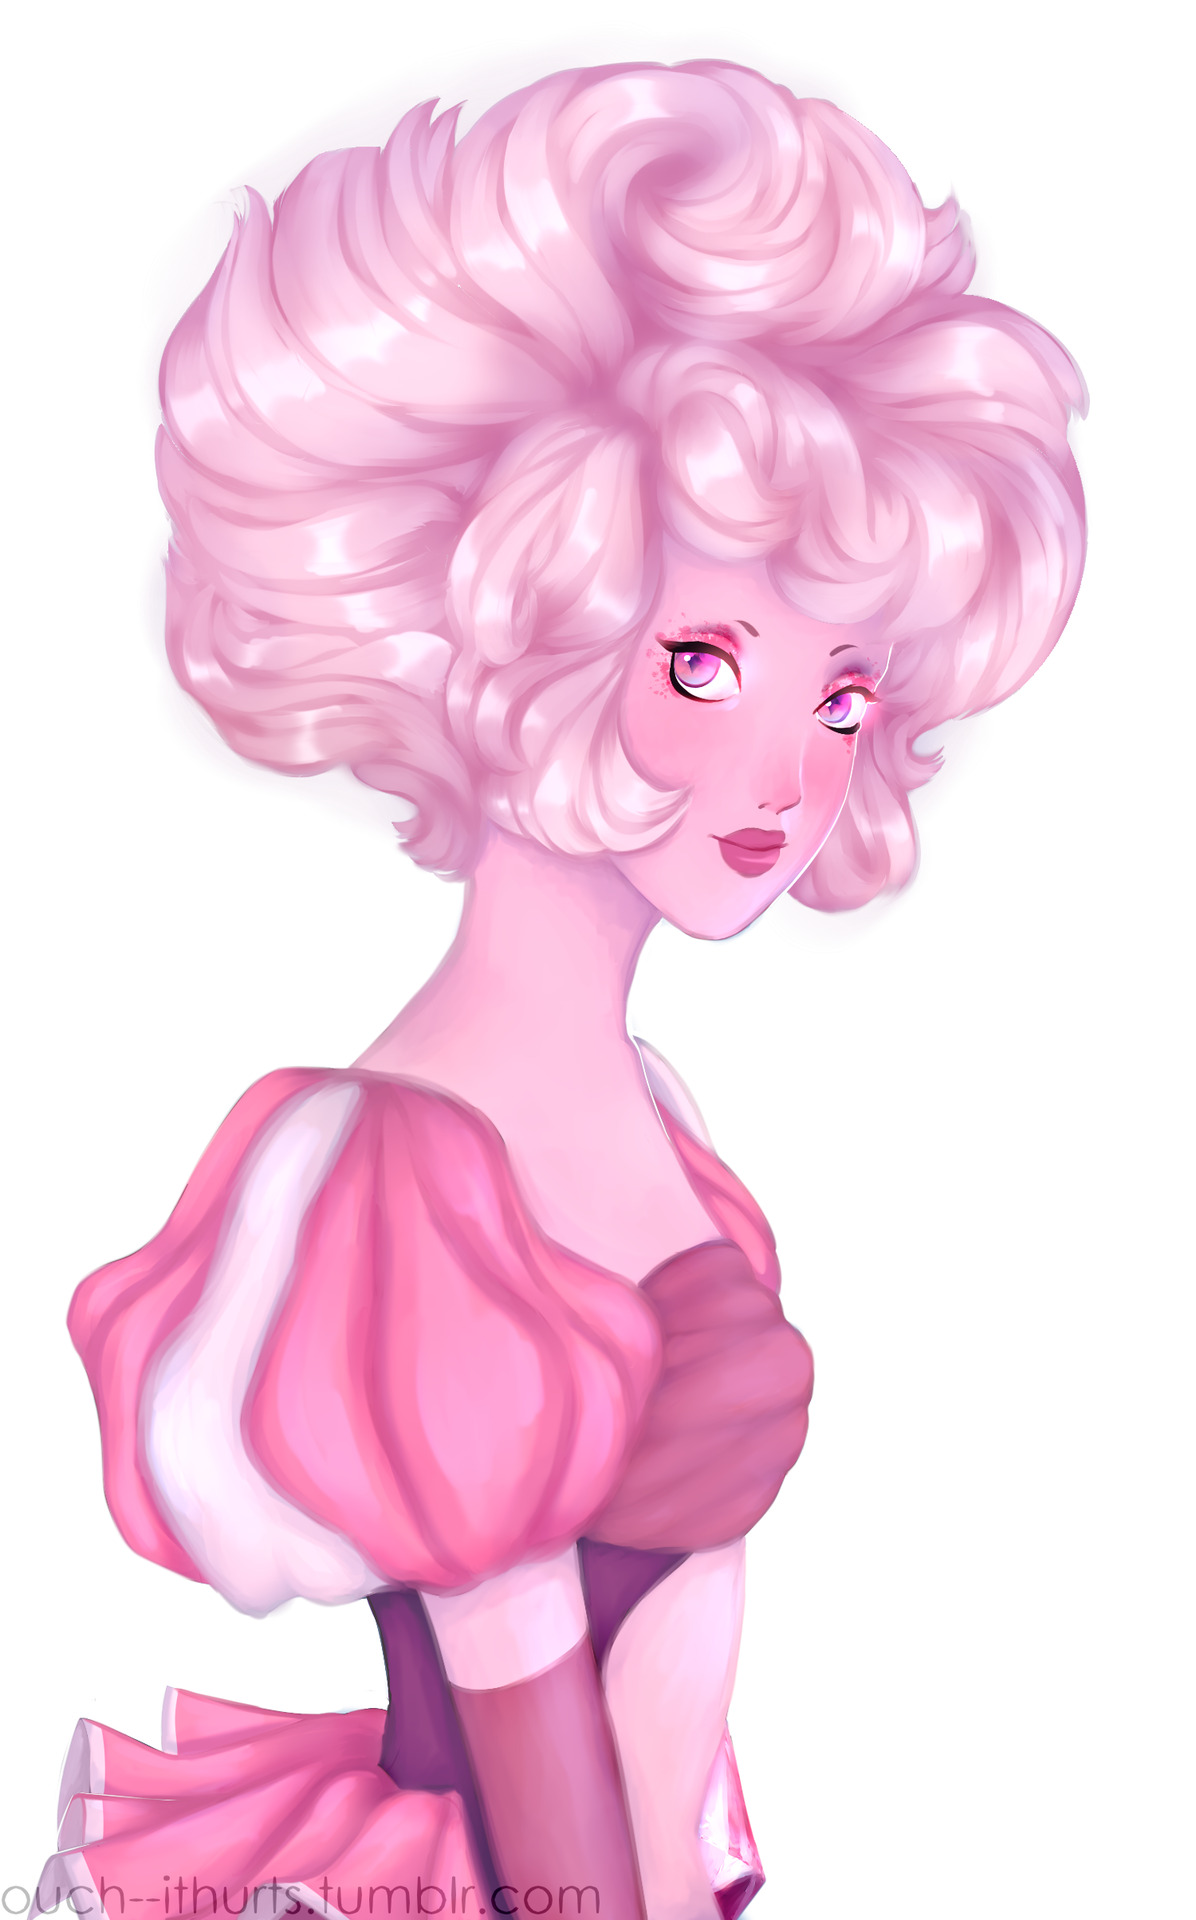 I changed the colors a bit and she looks a way better this way (Sorry but I think Pink D is prettier than Blue D)